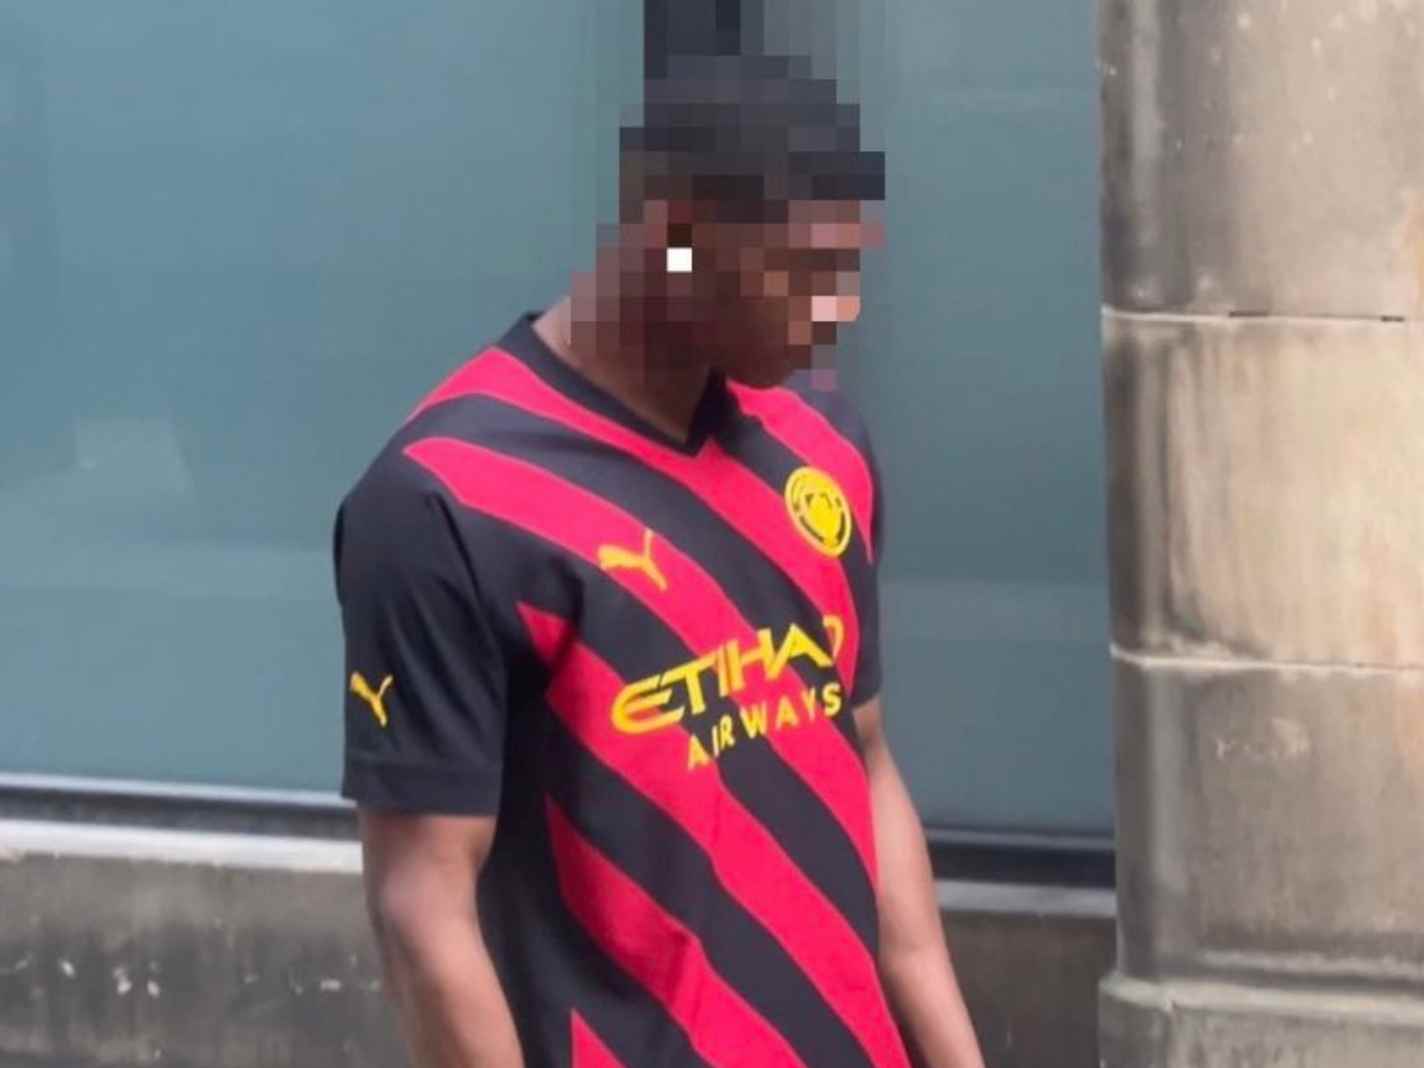 Manchester City away kit for 2022/23 season spotted out in public